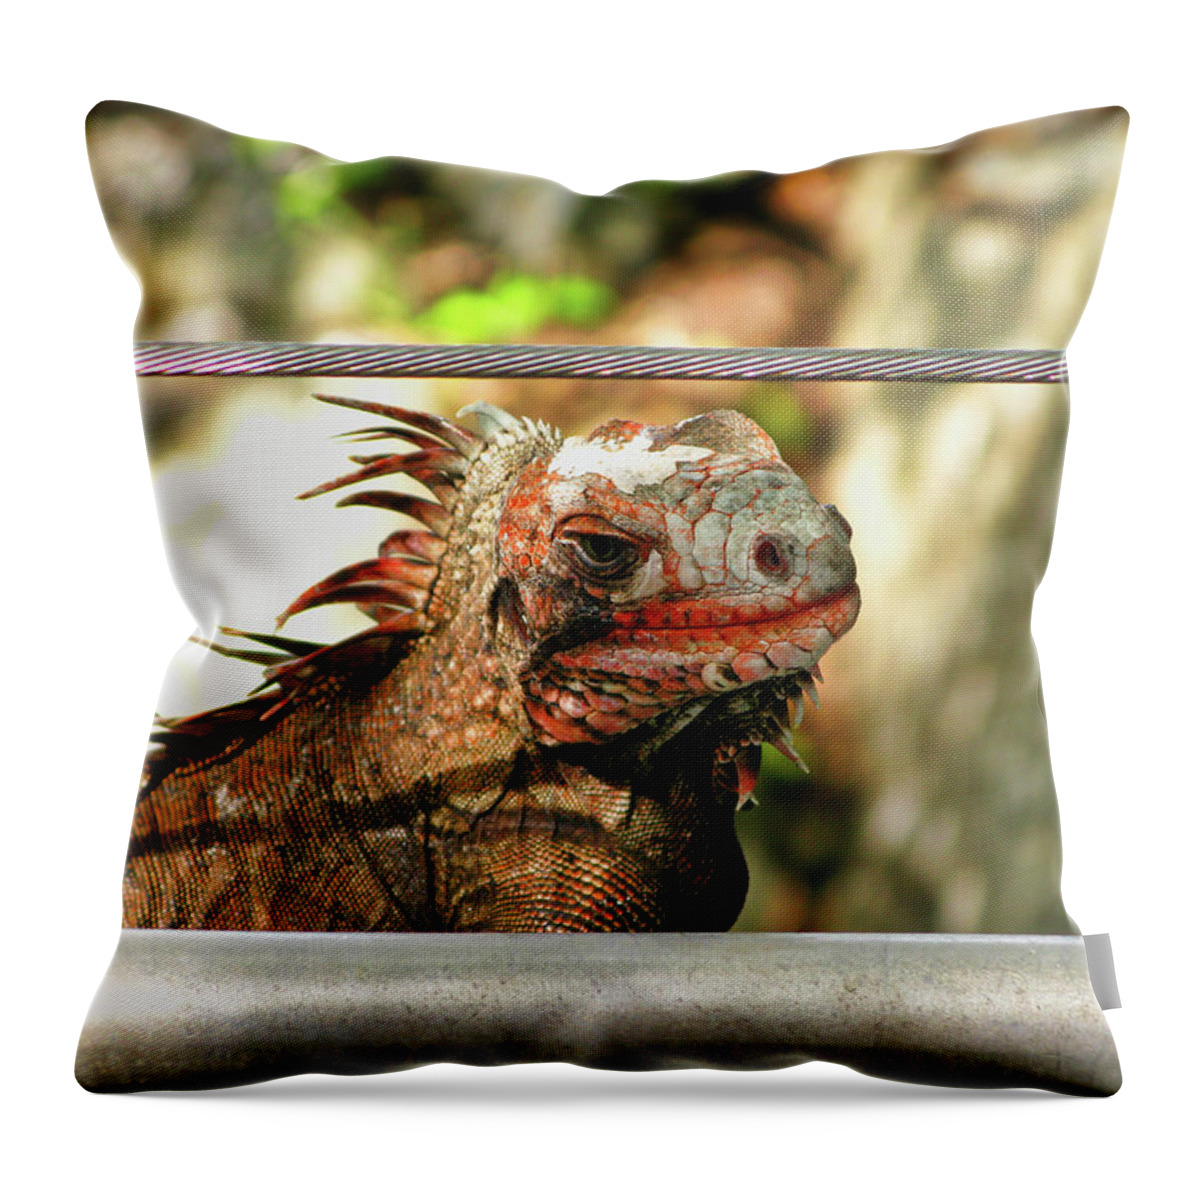 Animals Throw Pillow featuring the photograph I'm looking at you by Segura Shaw Photography